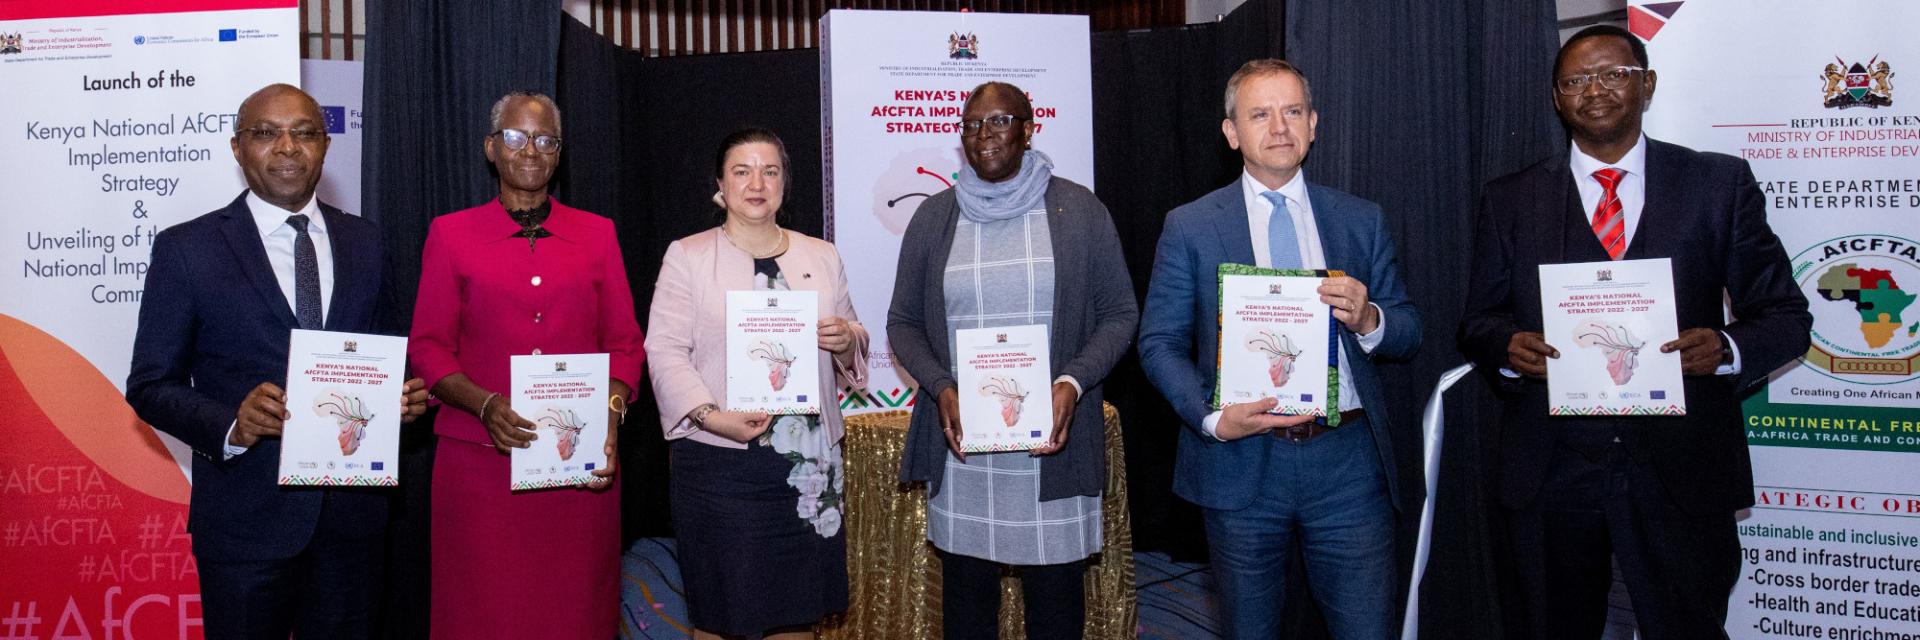 Kenya launches its National AfCFTA Implementation Strategy